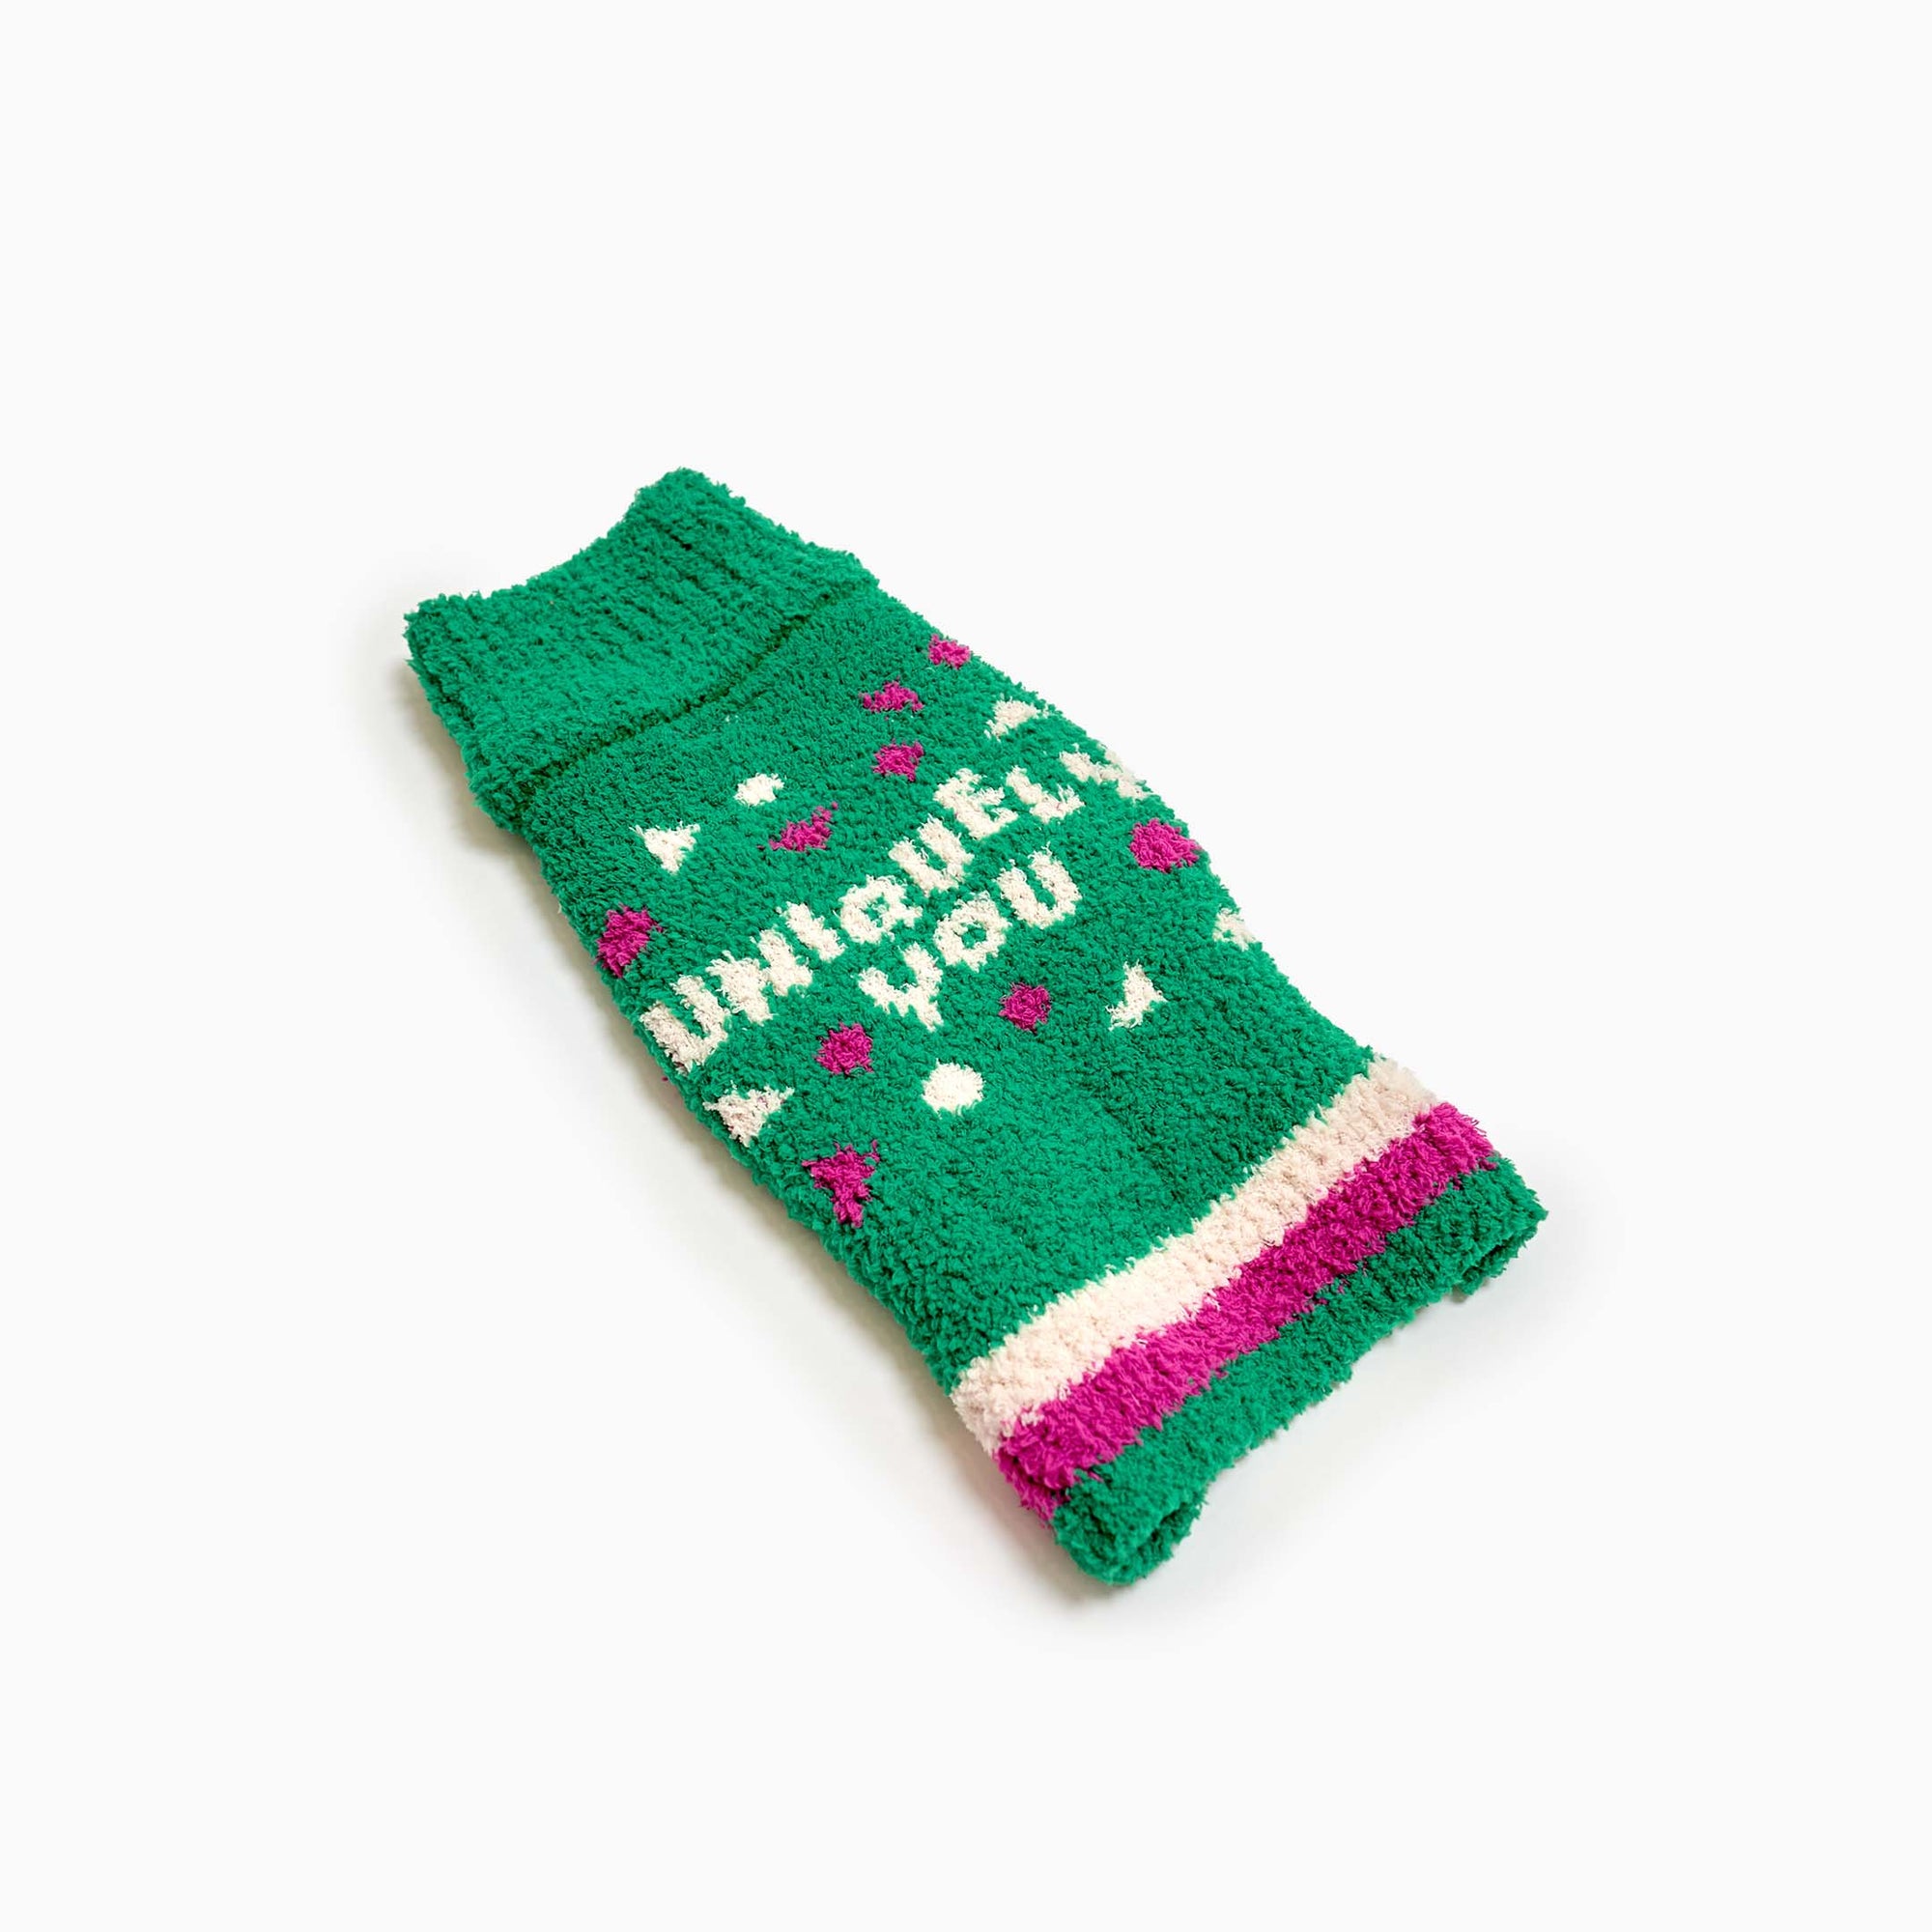 A vibrant green dog sweater with "Uniquely You" text and heart motifs, perfect for a pet's personalized fashion statement.